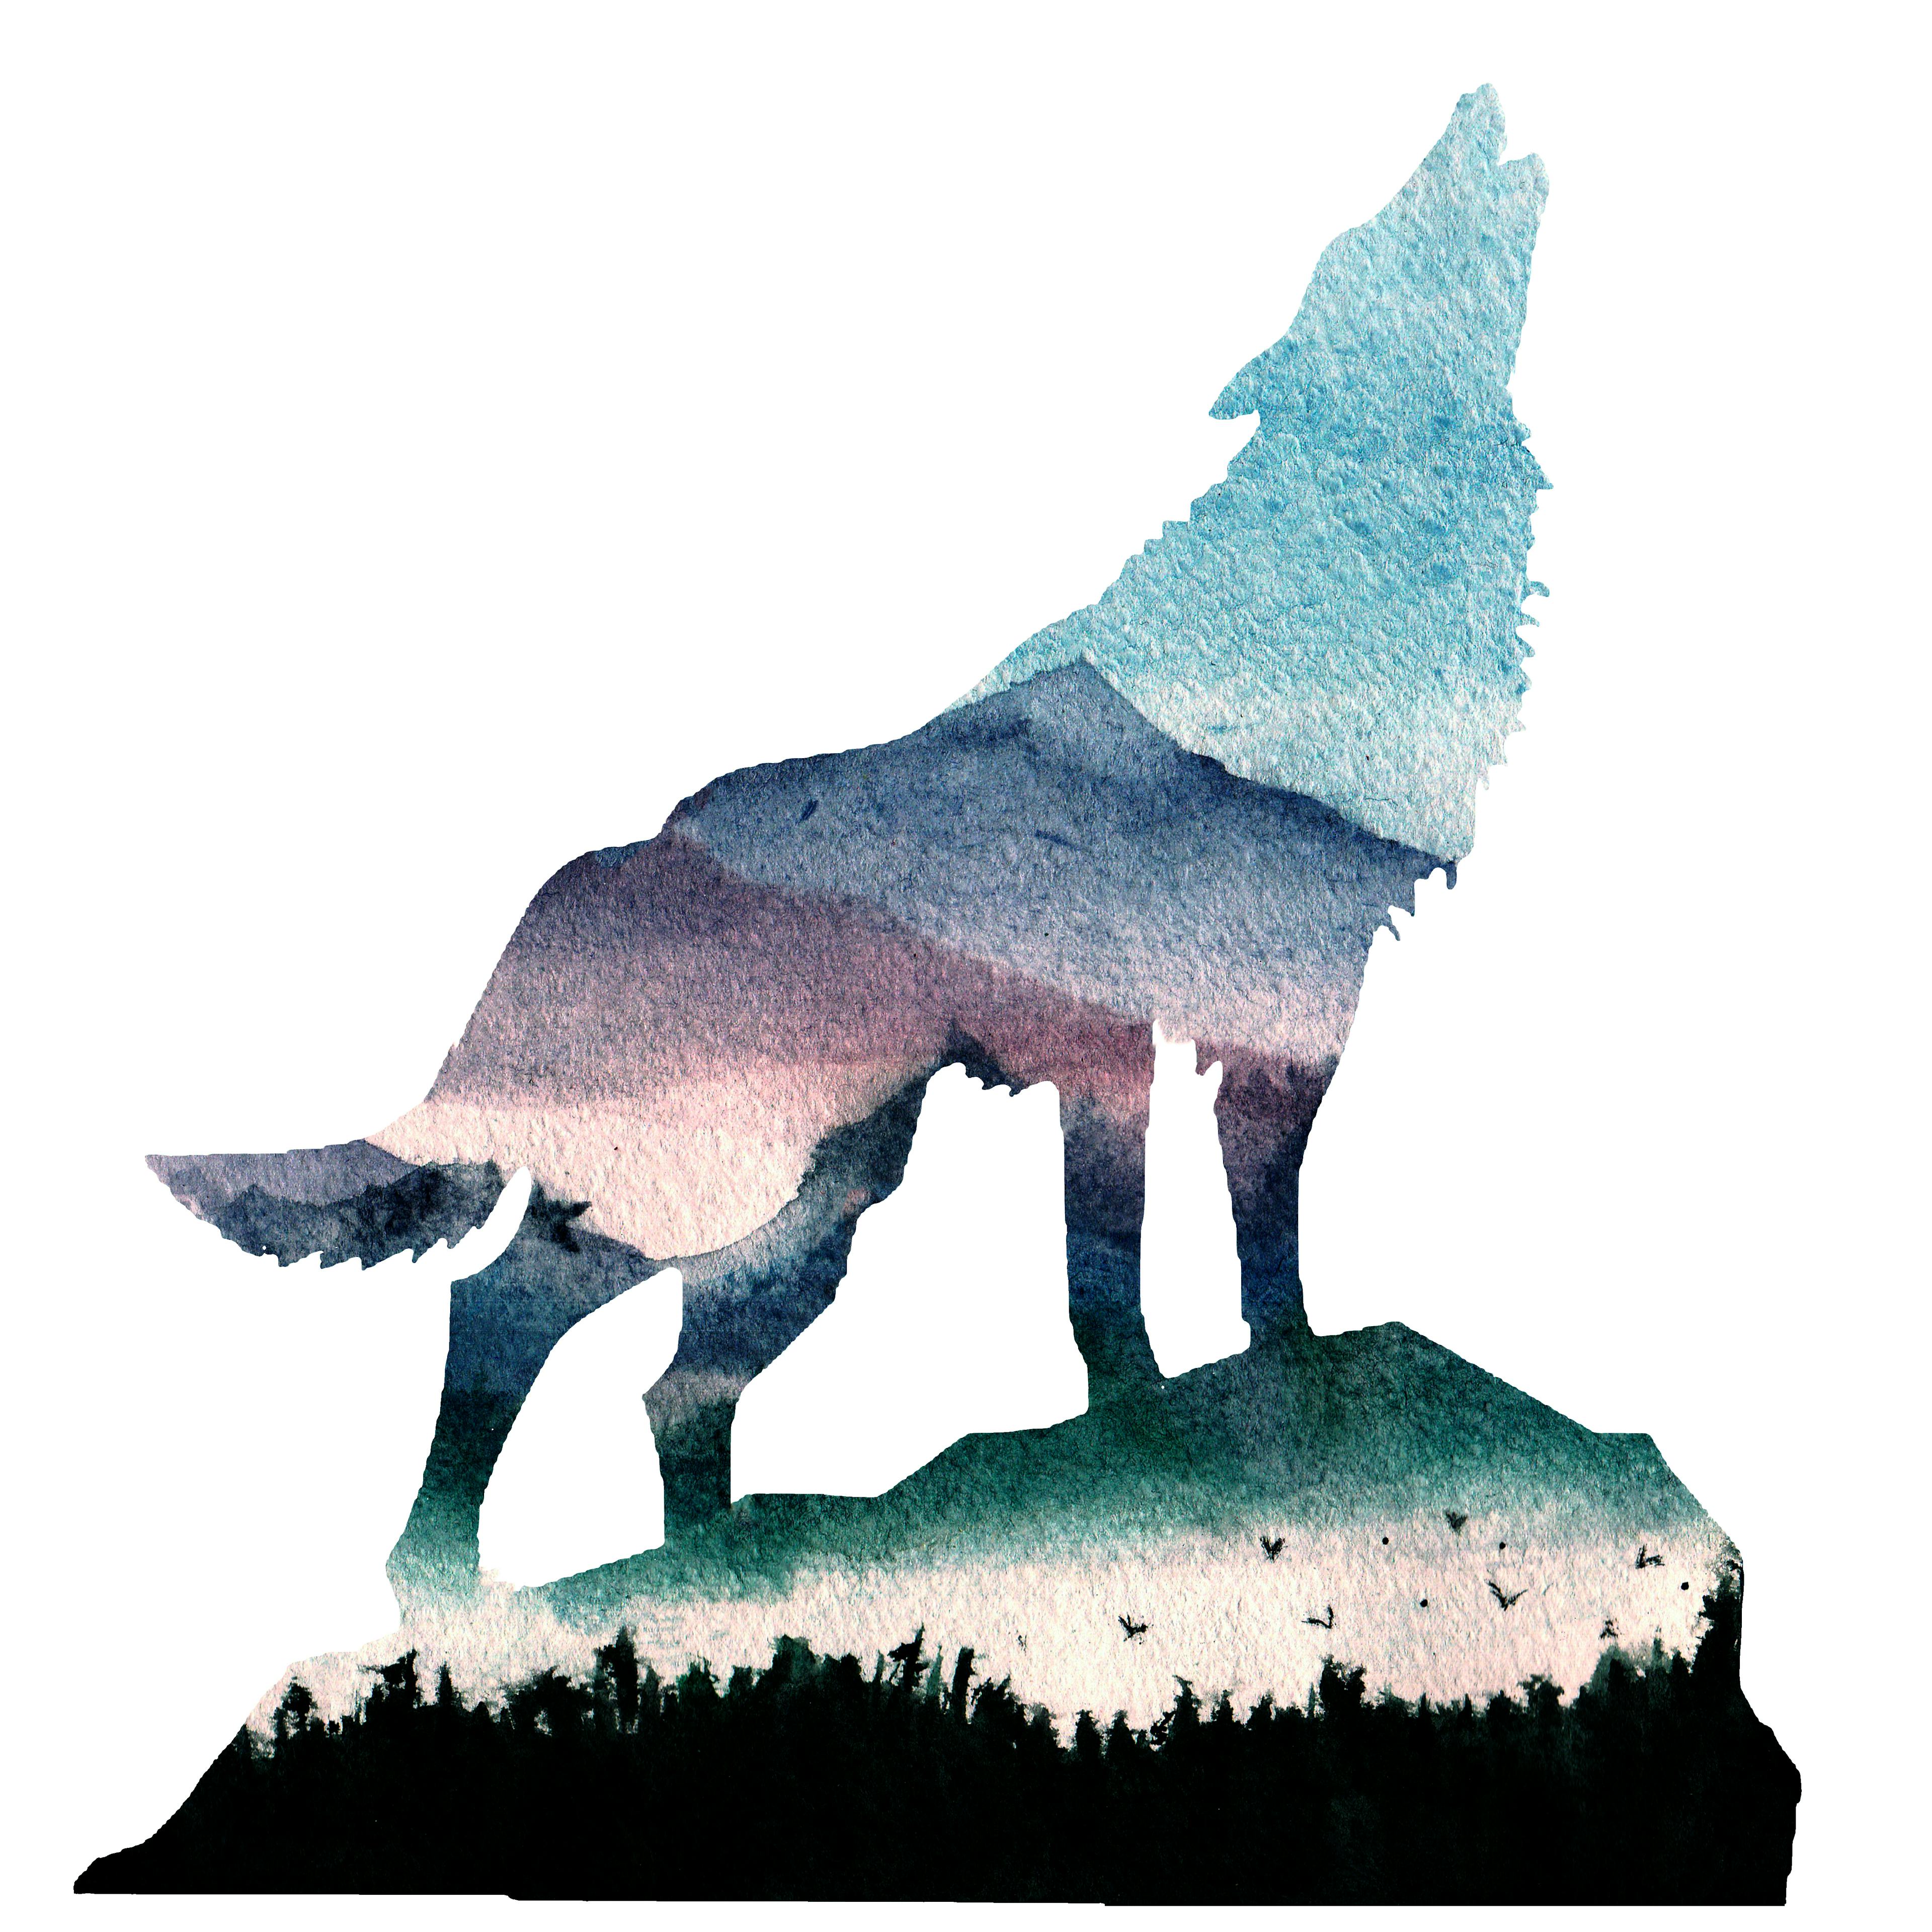 Annual report - wolf image